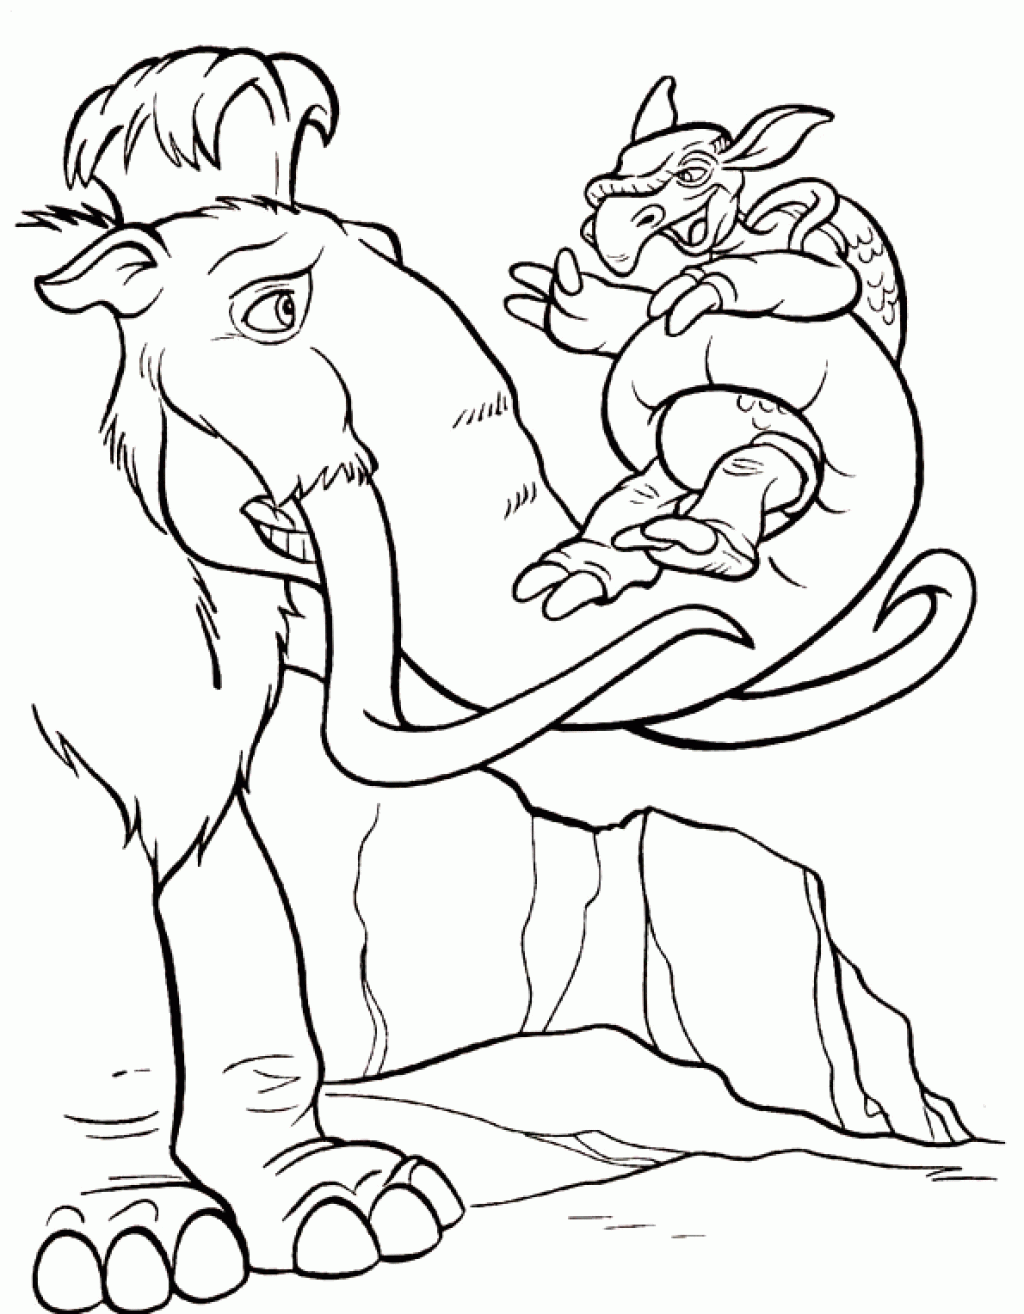 ice age 3 printable coloring pages - photo #20